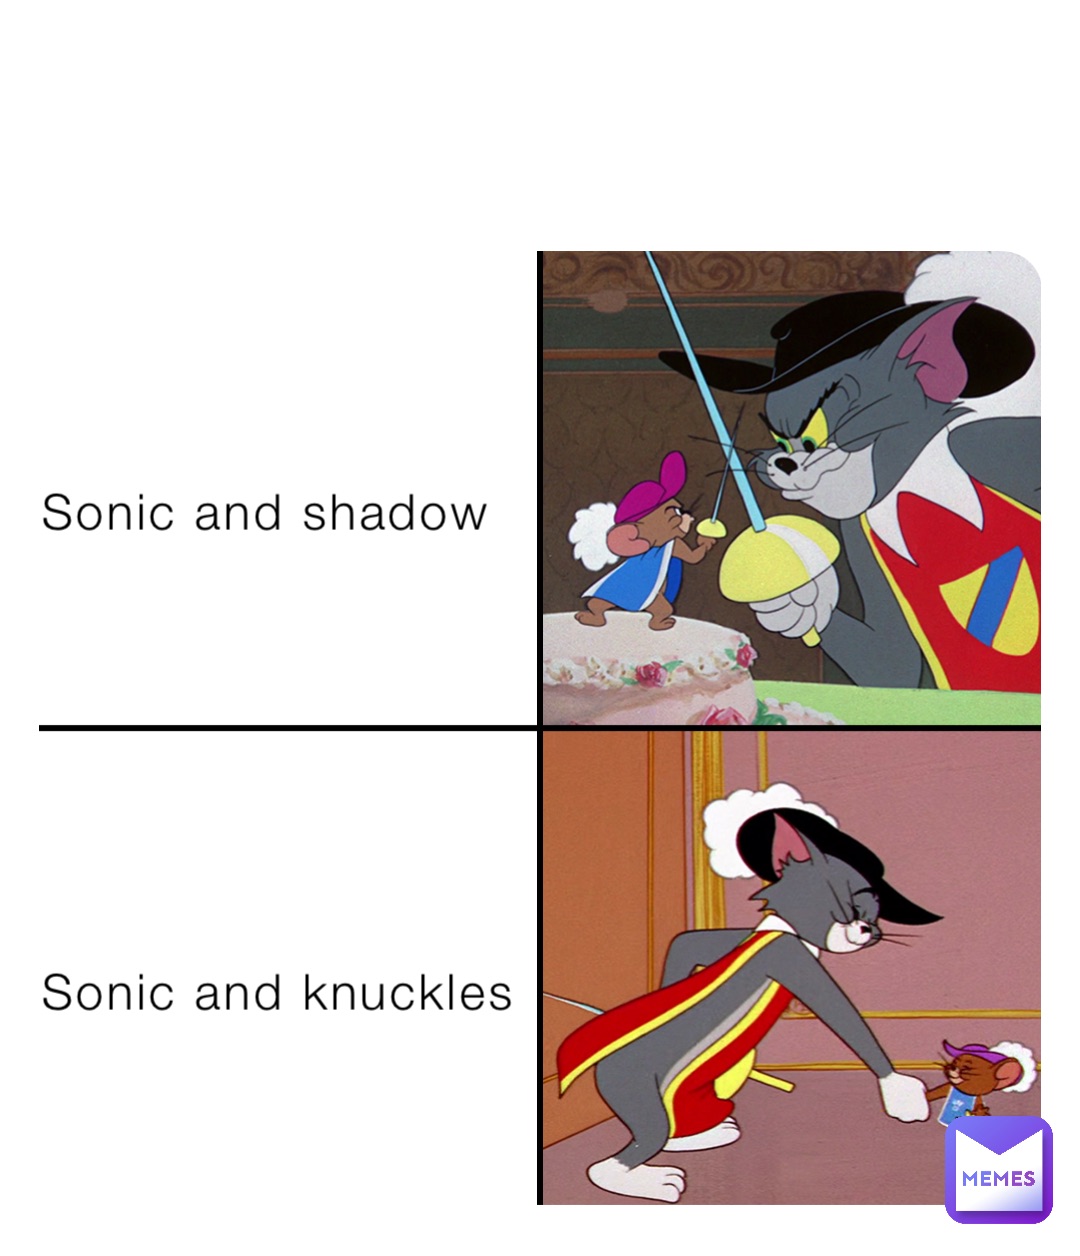 Sonic and shadow







Sonic and knuckles